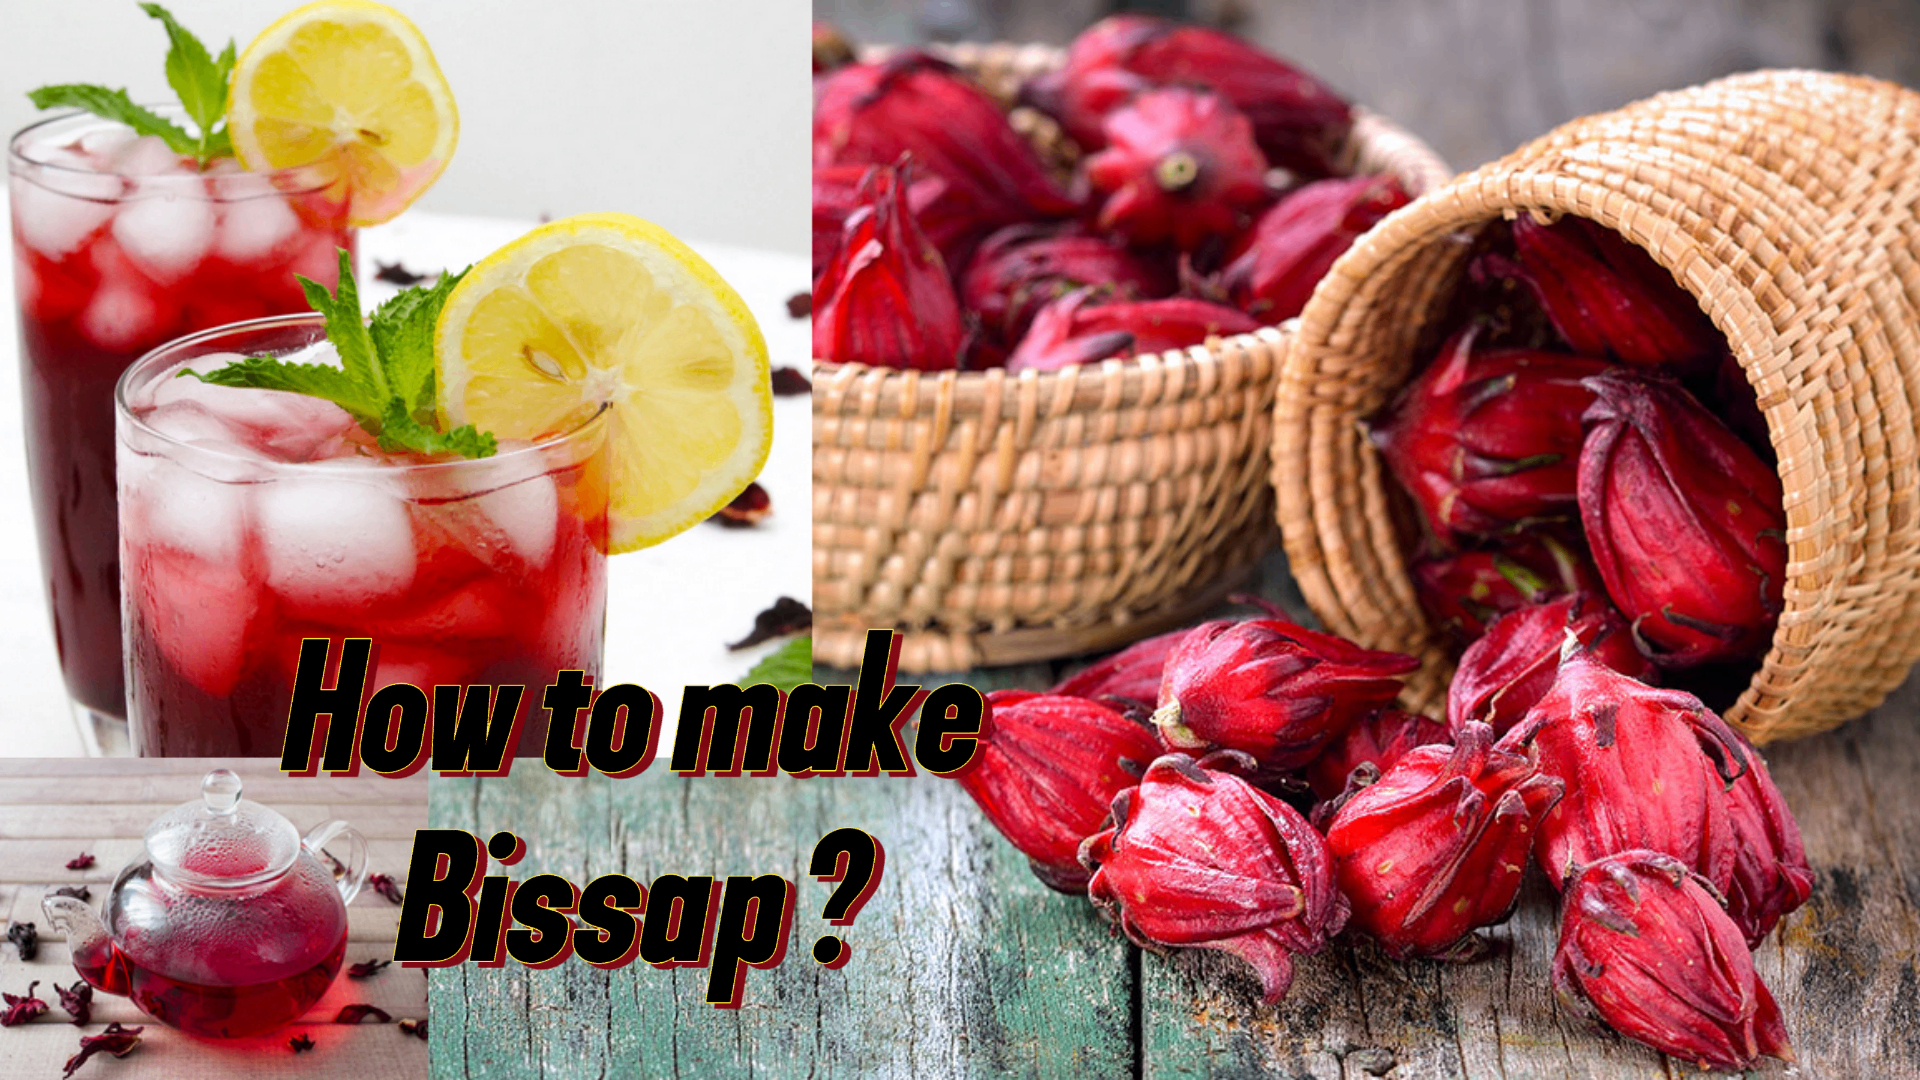 How to make Bissap